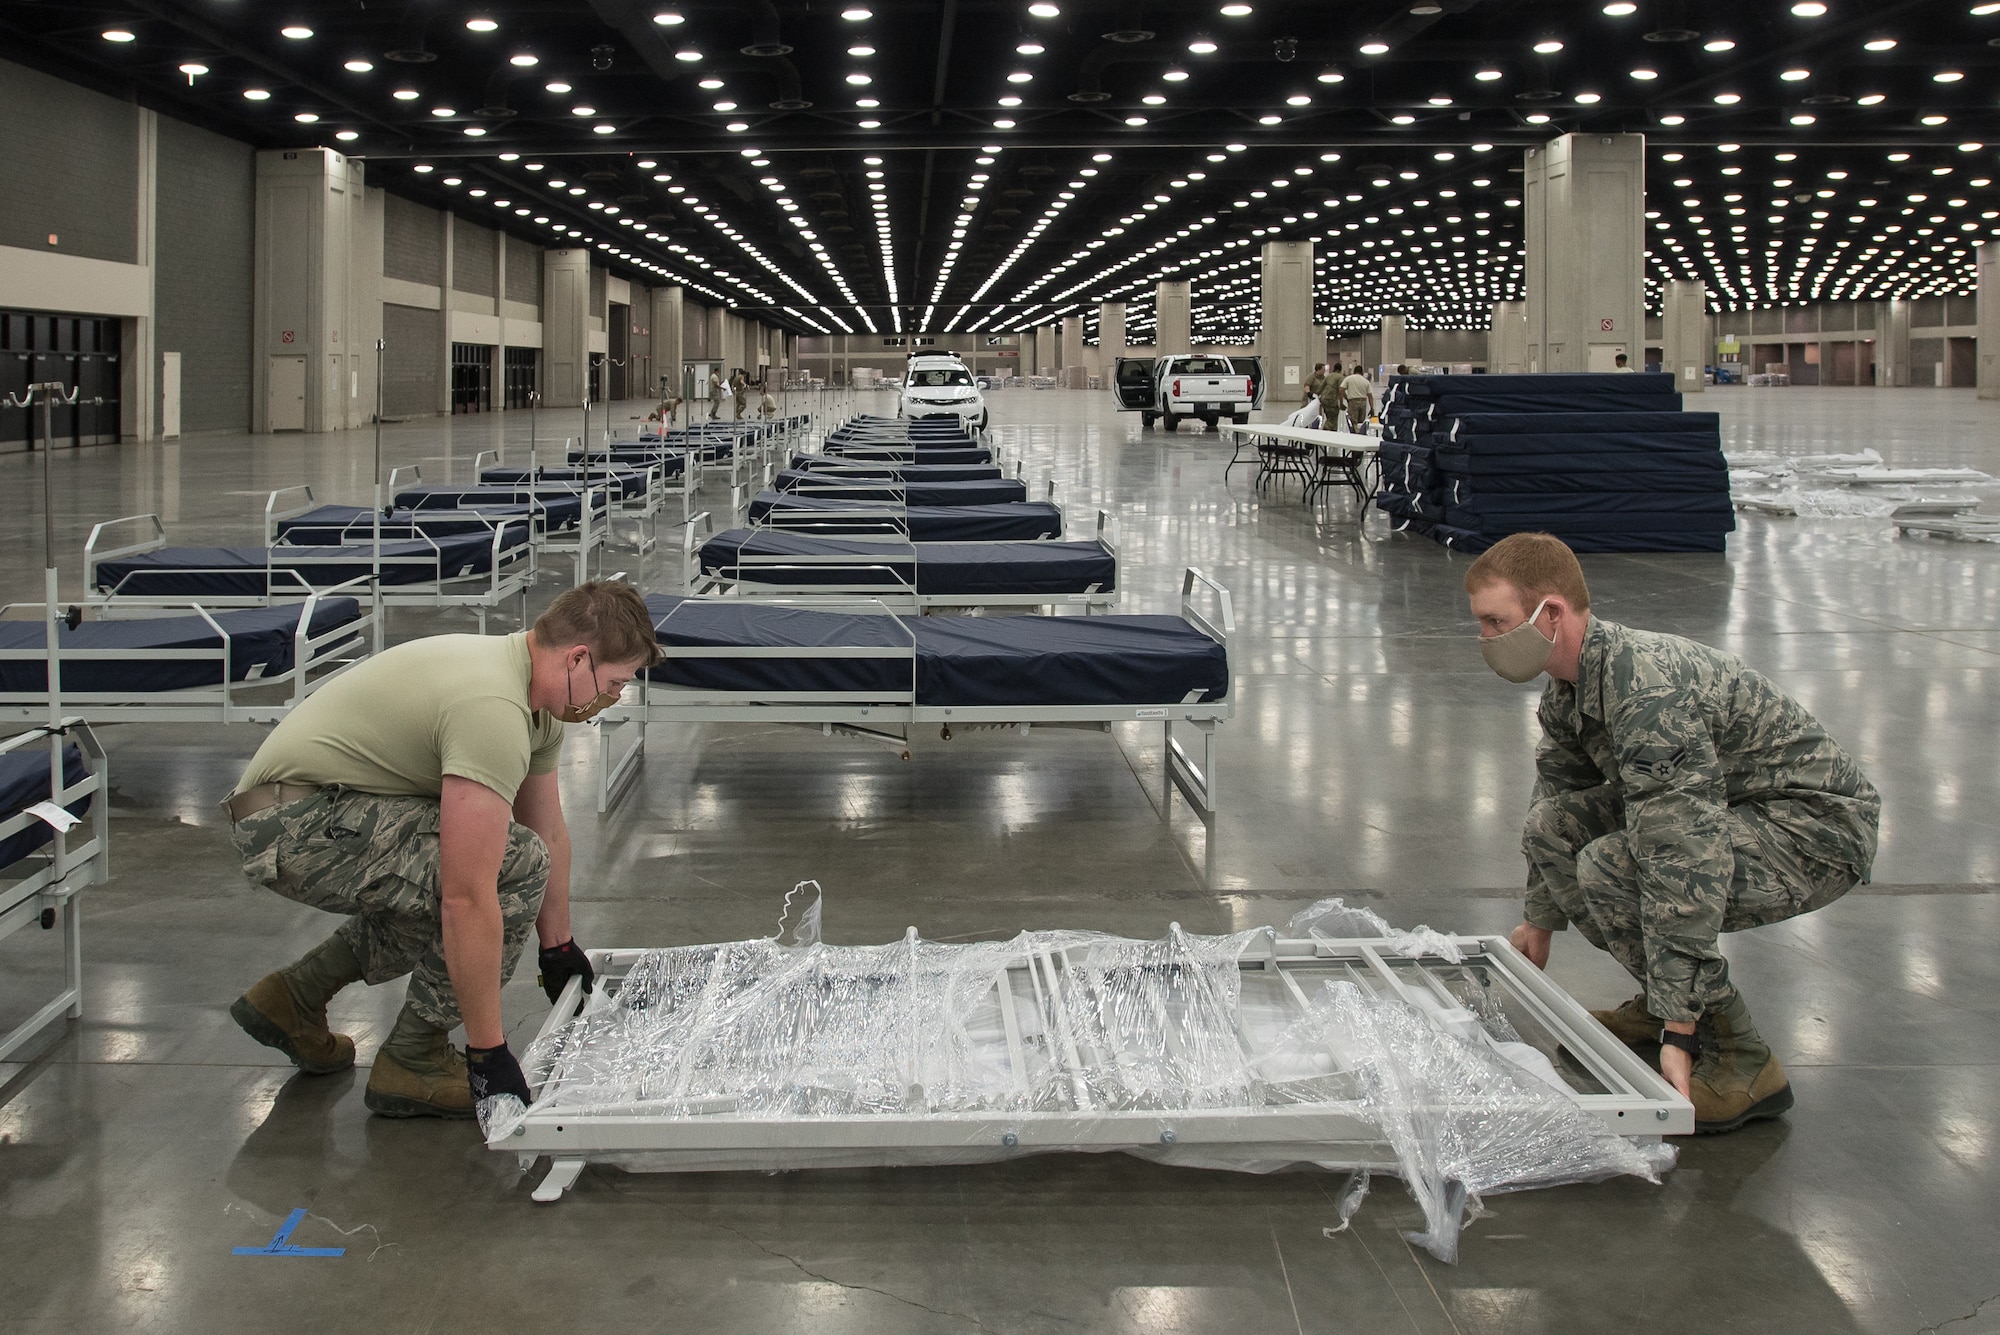 More than 30 members of the Kentucky Air National Guard’s 123rd Civil Engineer Squadron set up hospital beds and clinical space at the Kentucky Fair and Exposition Center in Louisville, Ky., April 13, 2020. The site, which is expected to be operational April 15, will serve as an Alternate Care Facility for patients suffering from COVID-19 if area hospitals exceed available capacity. The location initially can treat up to 288 patients and is scalable to 2,000 beds. (U.S. Air National Guard photo by Dale Greer)